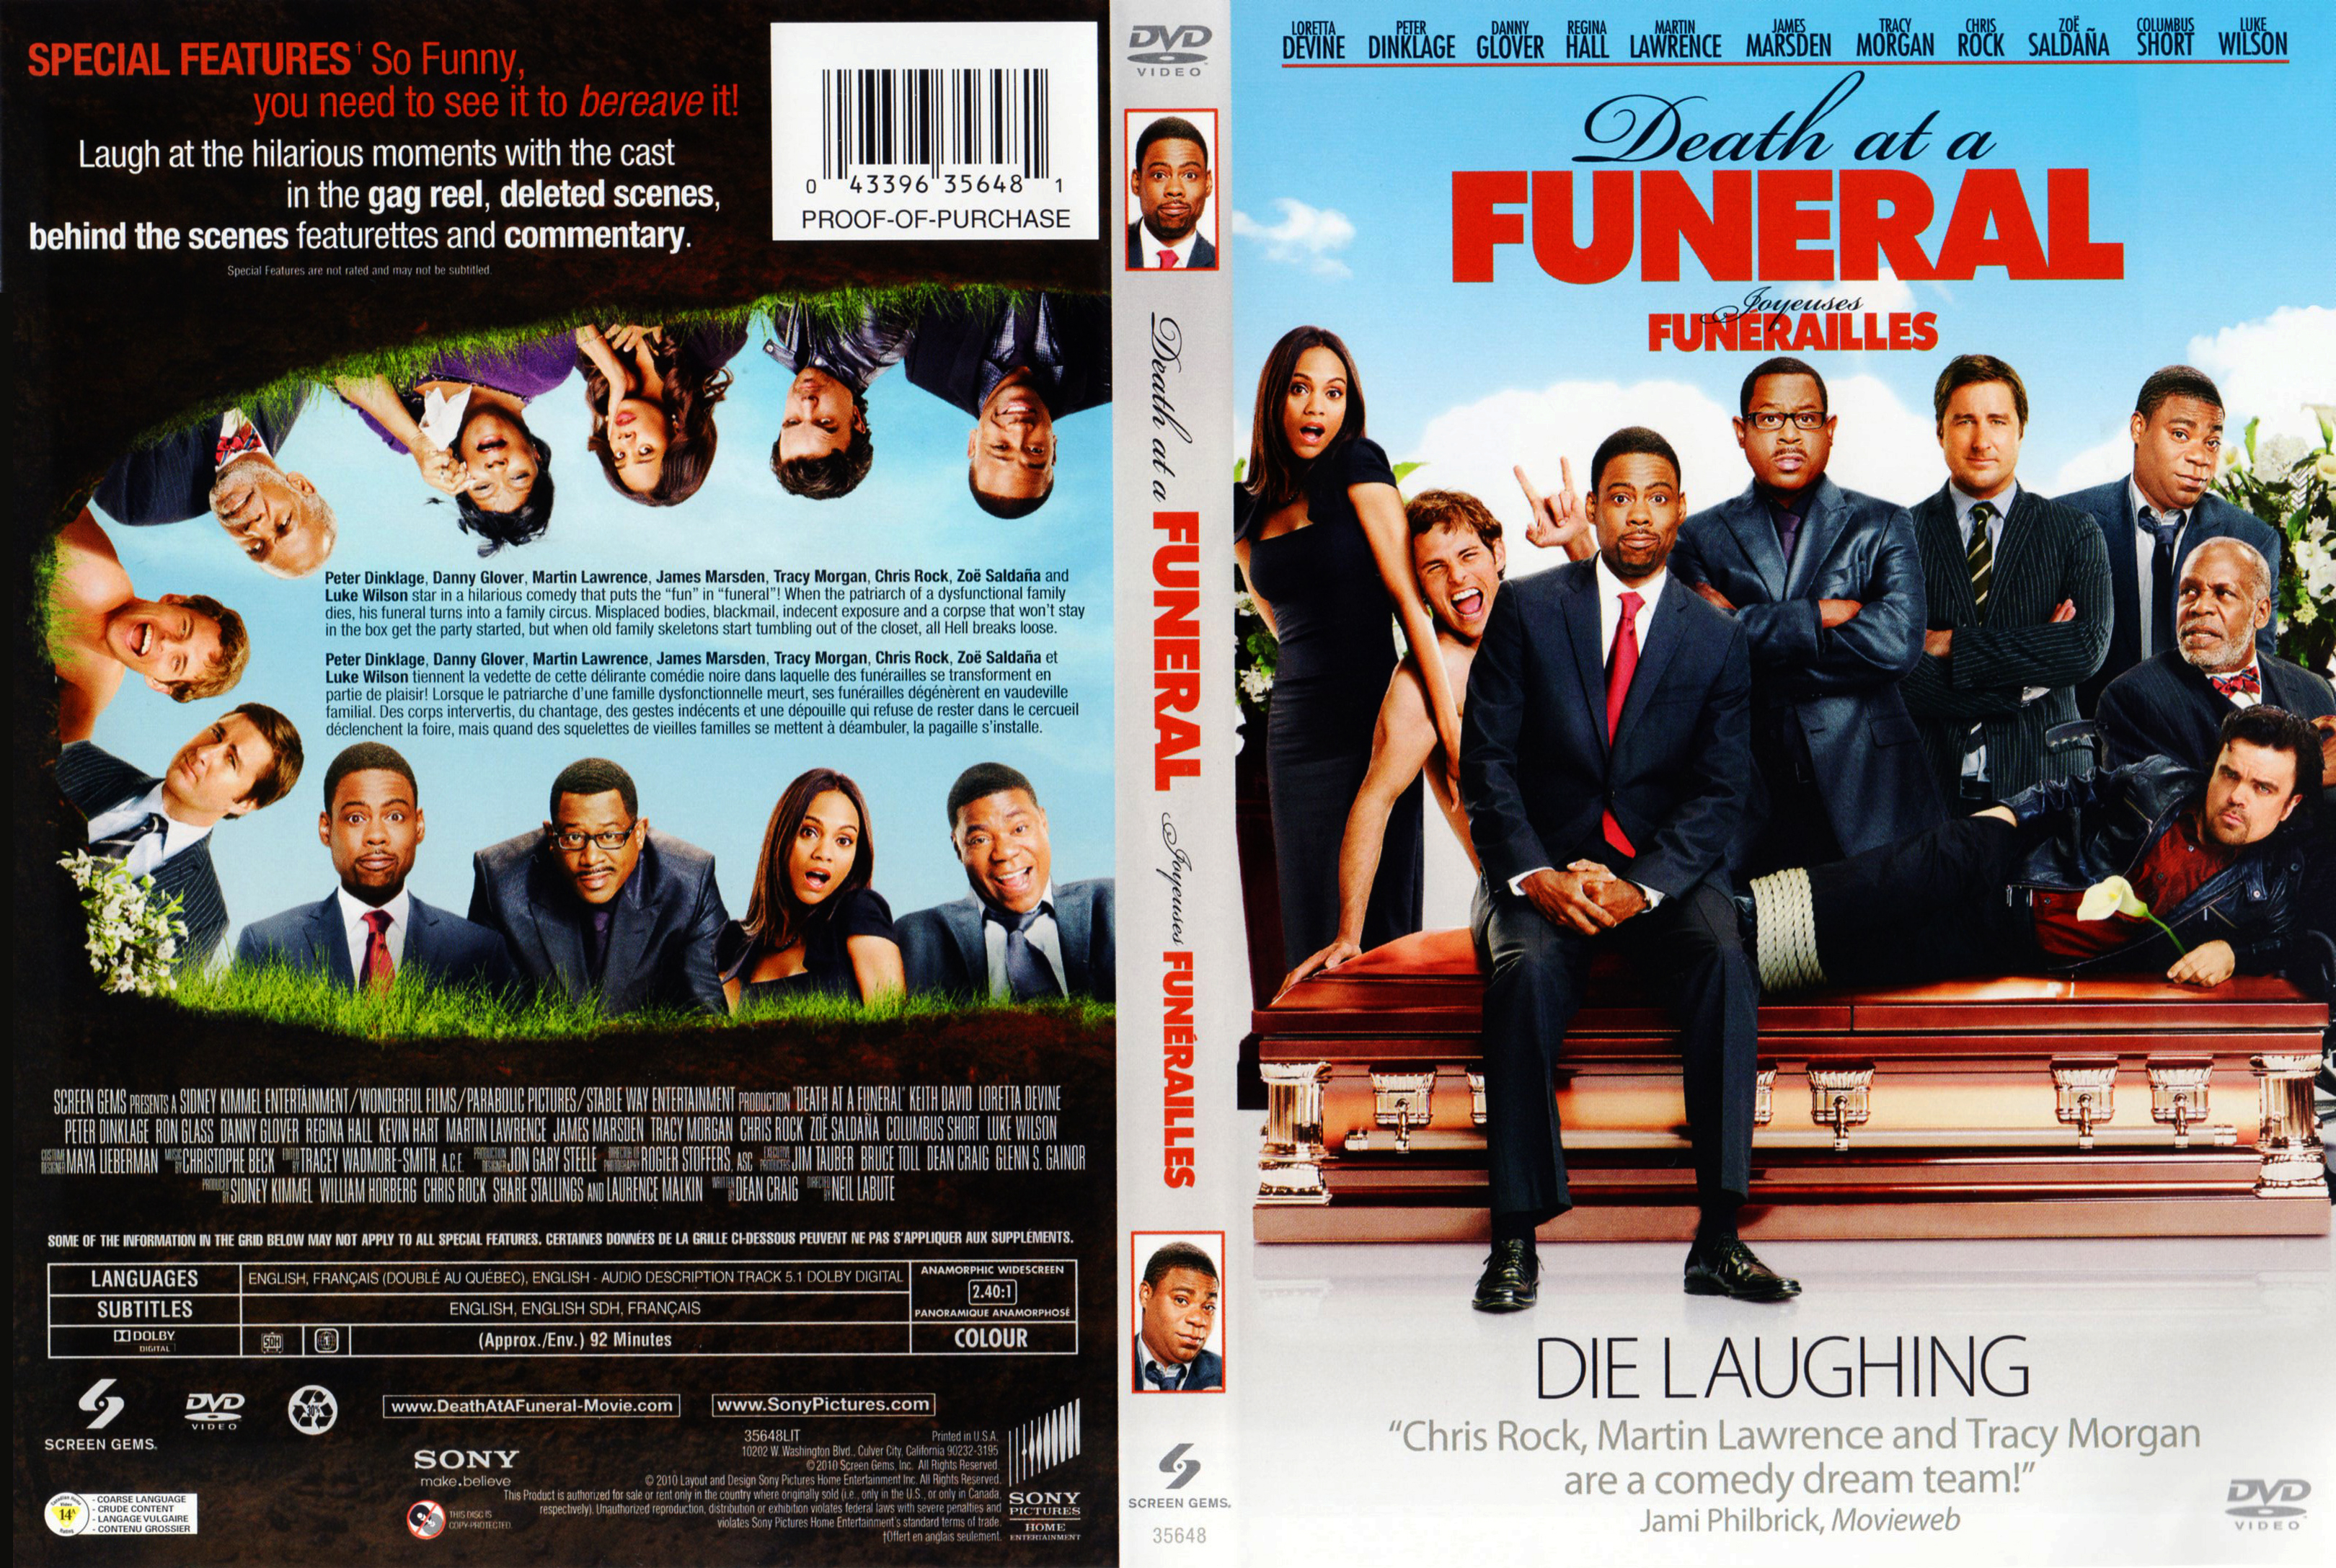 Jaquette DVD Death at a funeral - Joyeuses funrailles (Canadienne)